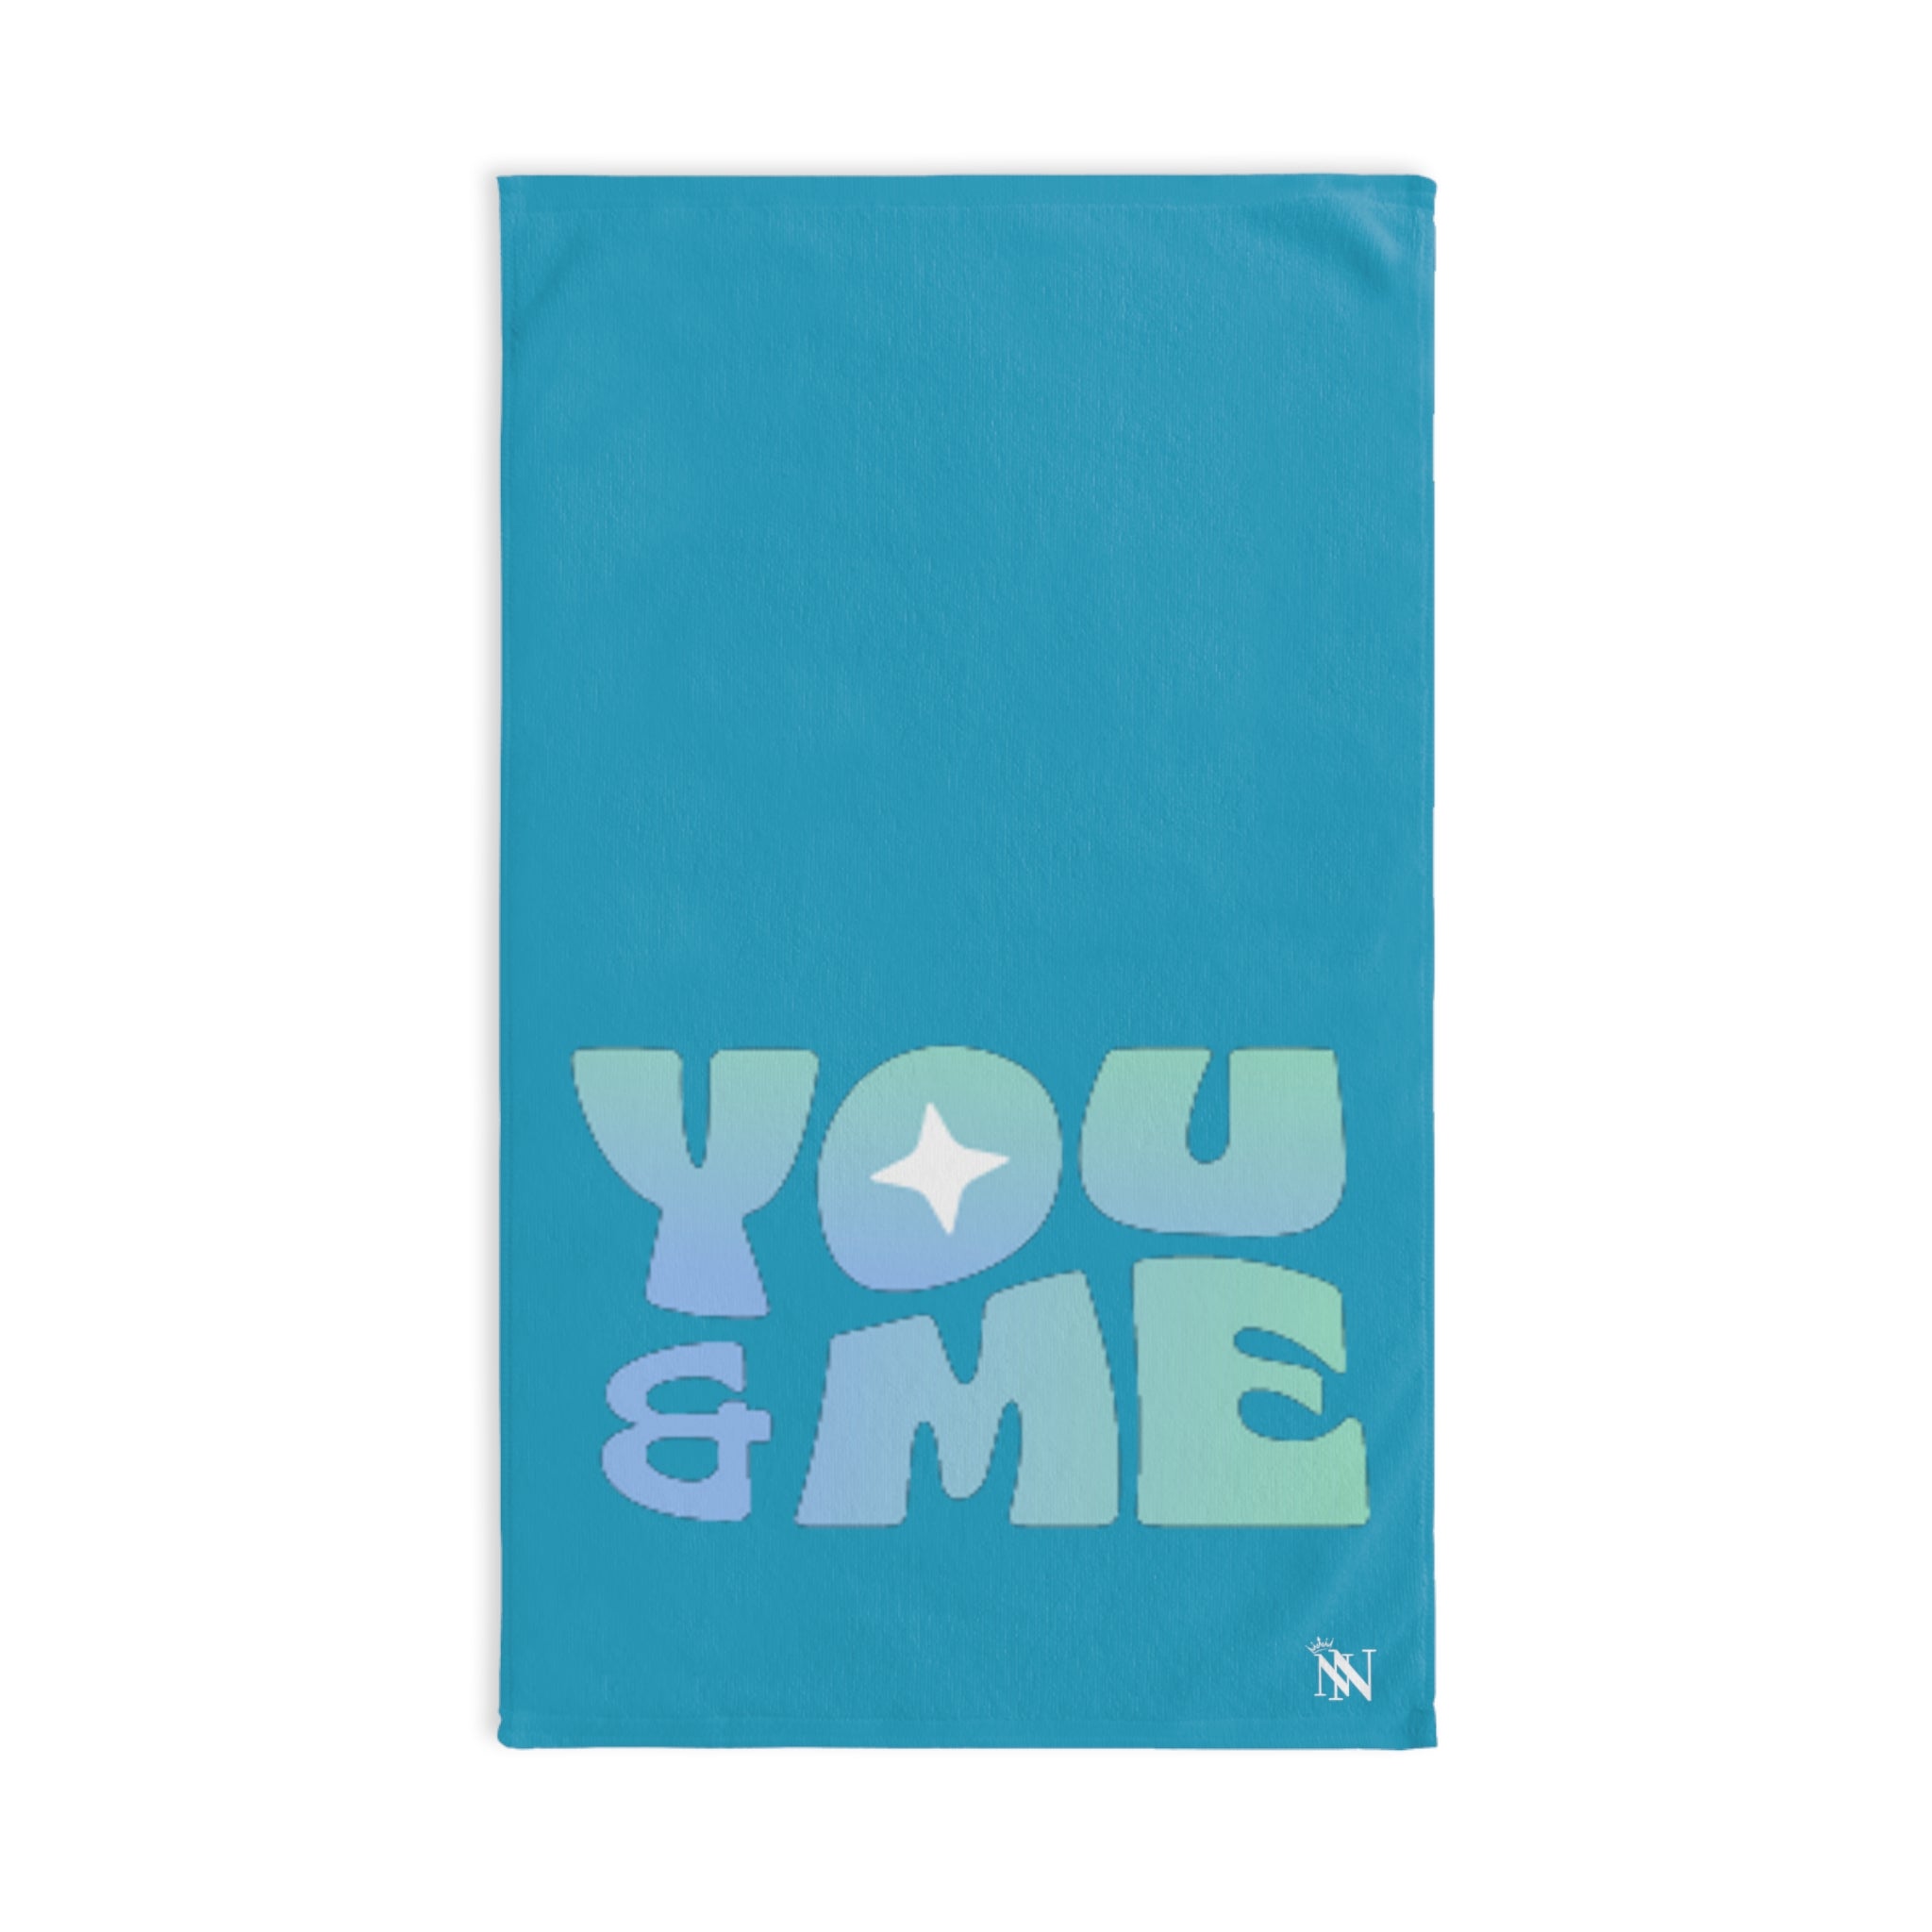 You Me Together Teal | Novelty Gifts for Boyfriend, Funny Towel Romantic Gift for Wedding Couple Fiance First Year Anniversary Valentines, Party Gag Gifts, Joke Humor Cloth for Husband Men BF NECTAR NAPKINS